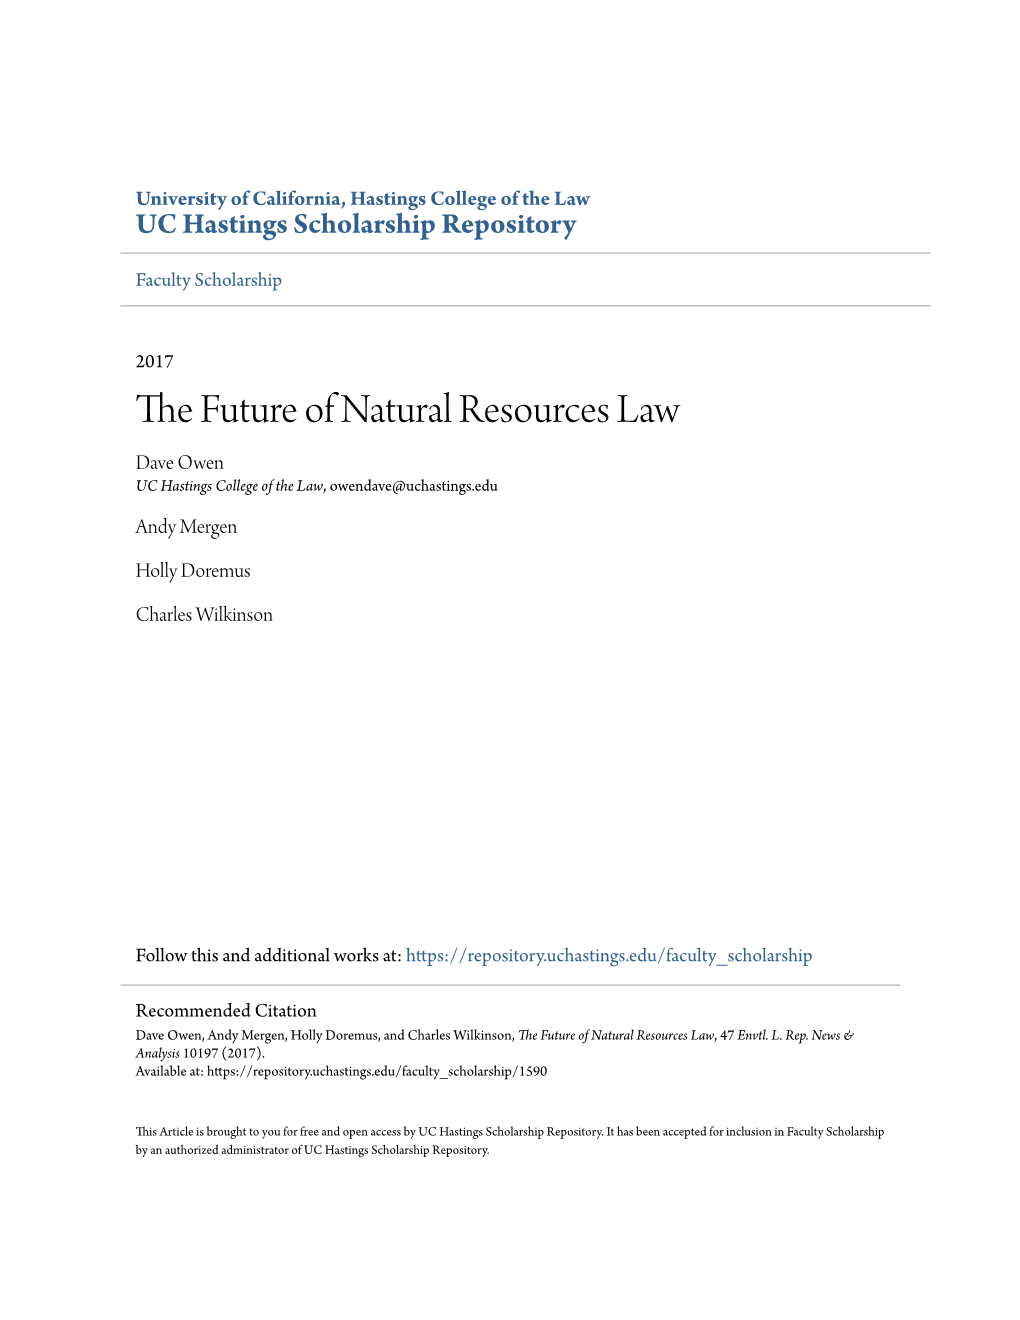 The Future of Natural Resources Law, 47 Envtl